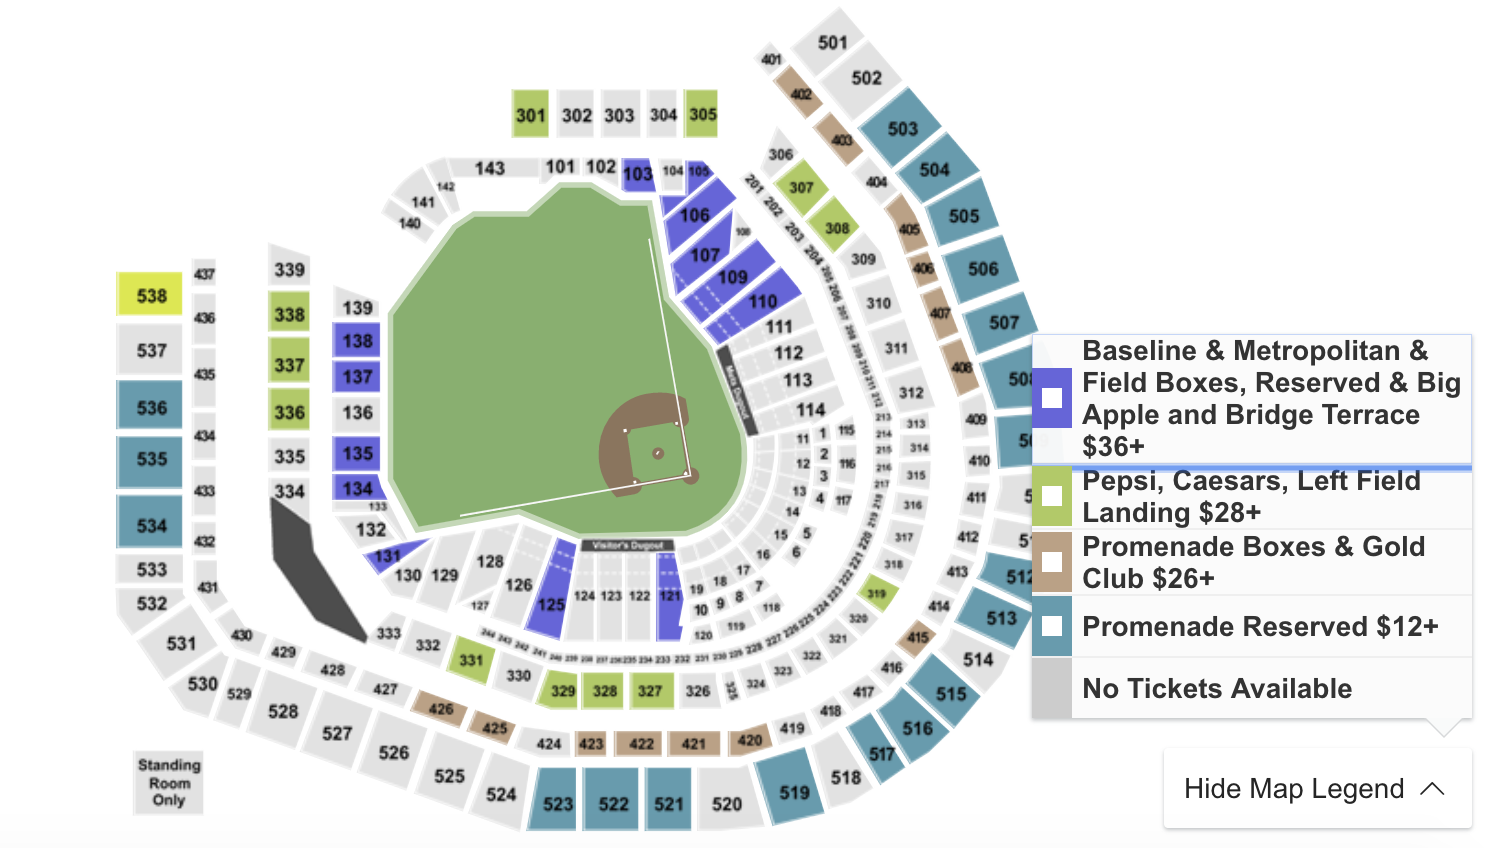 Mets Seating Chart 2018